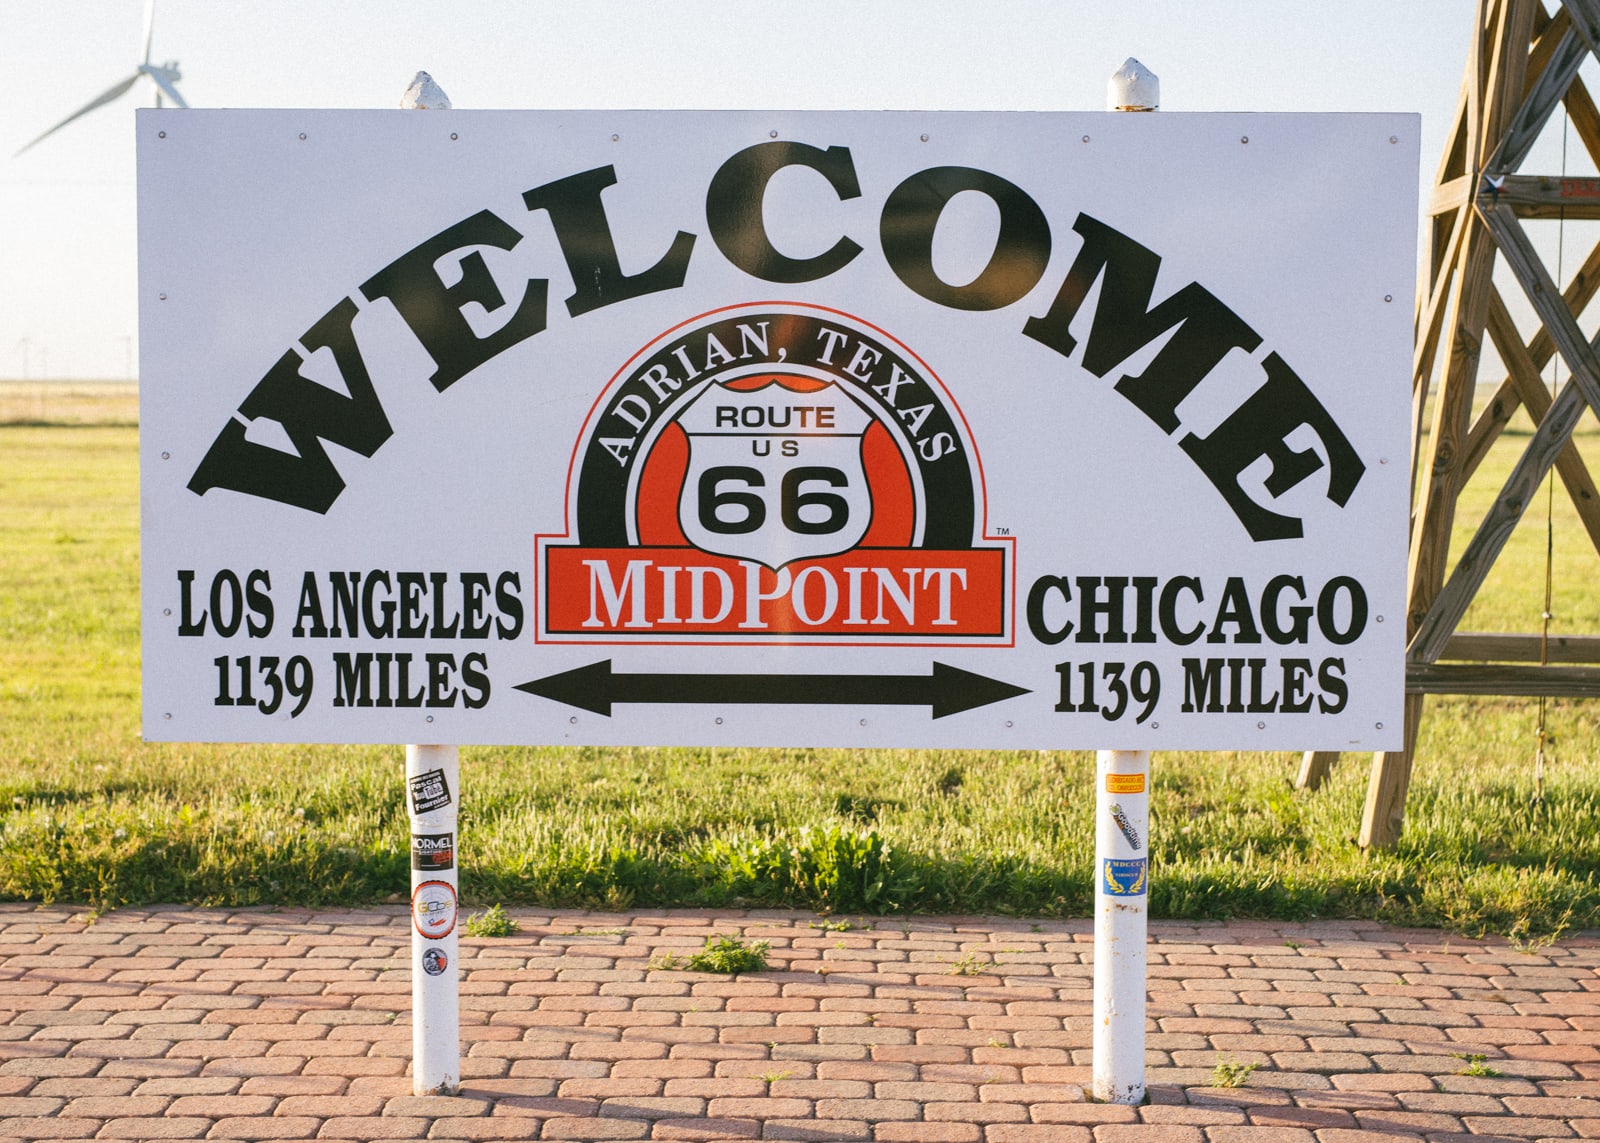 Route 66 Midpoint sign between Chicago and Los Angeles